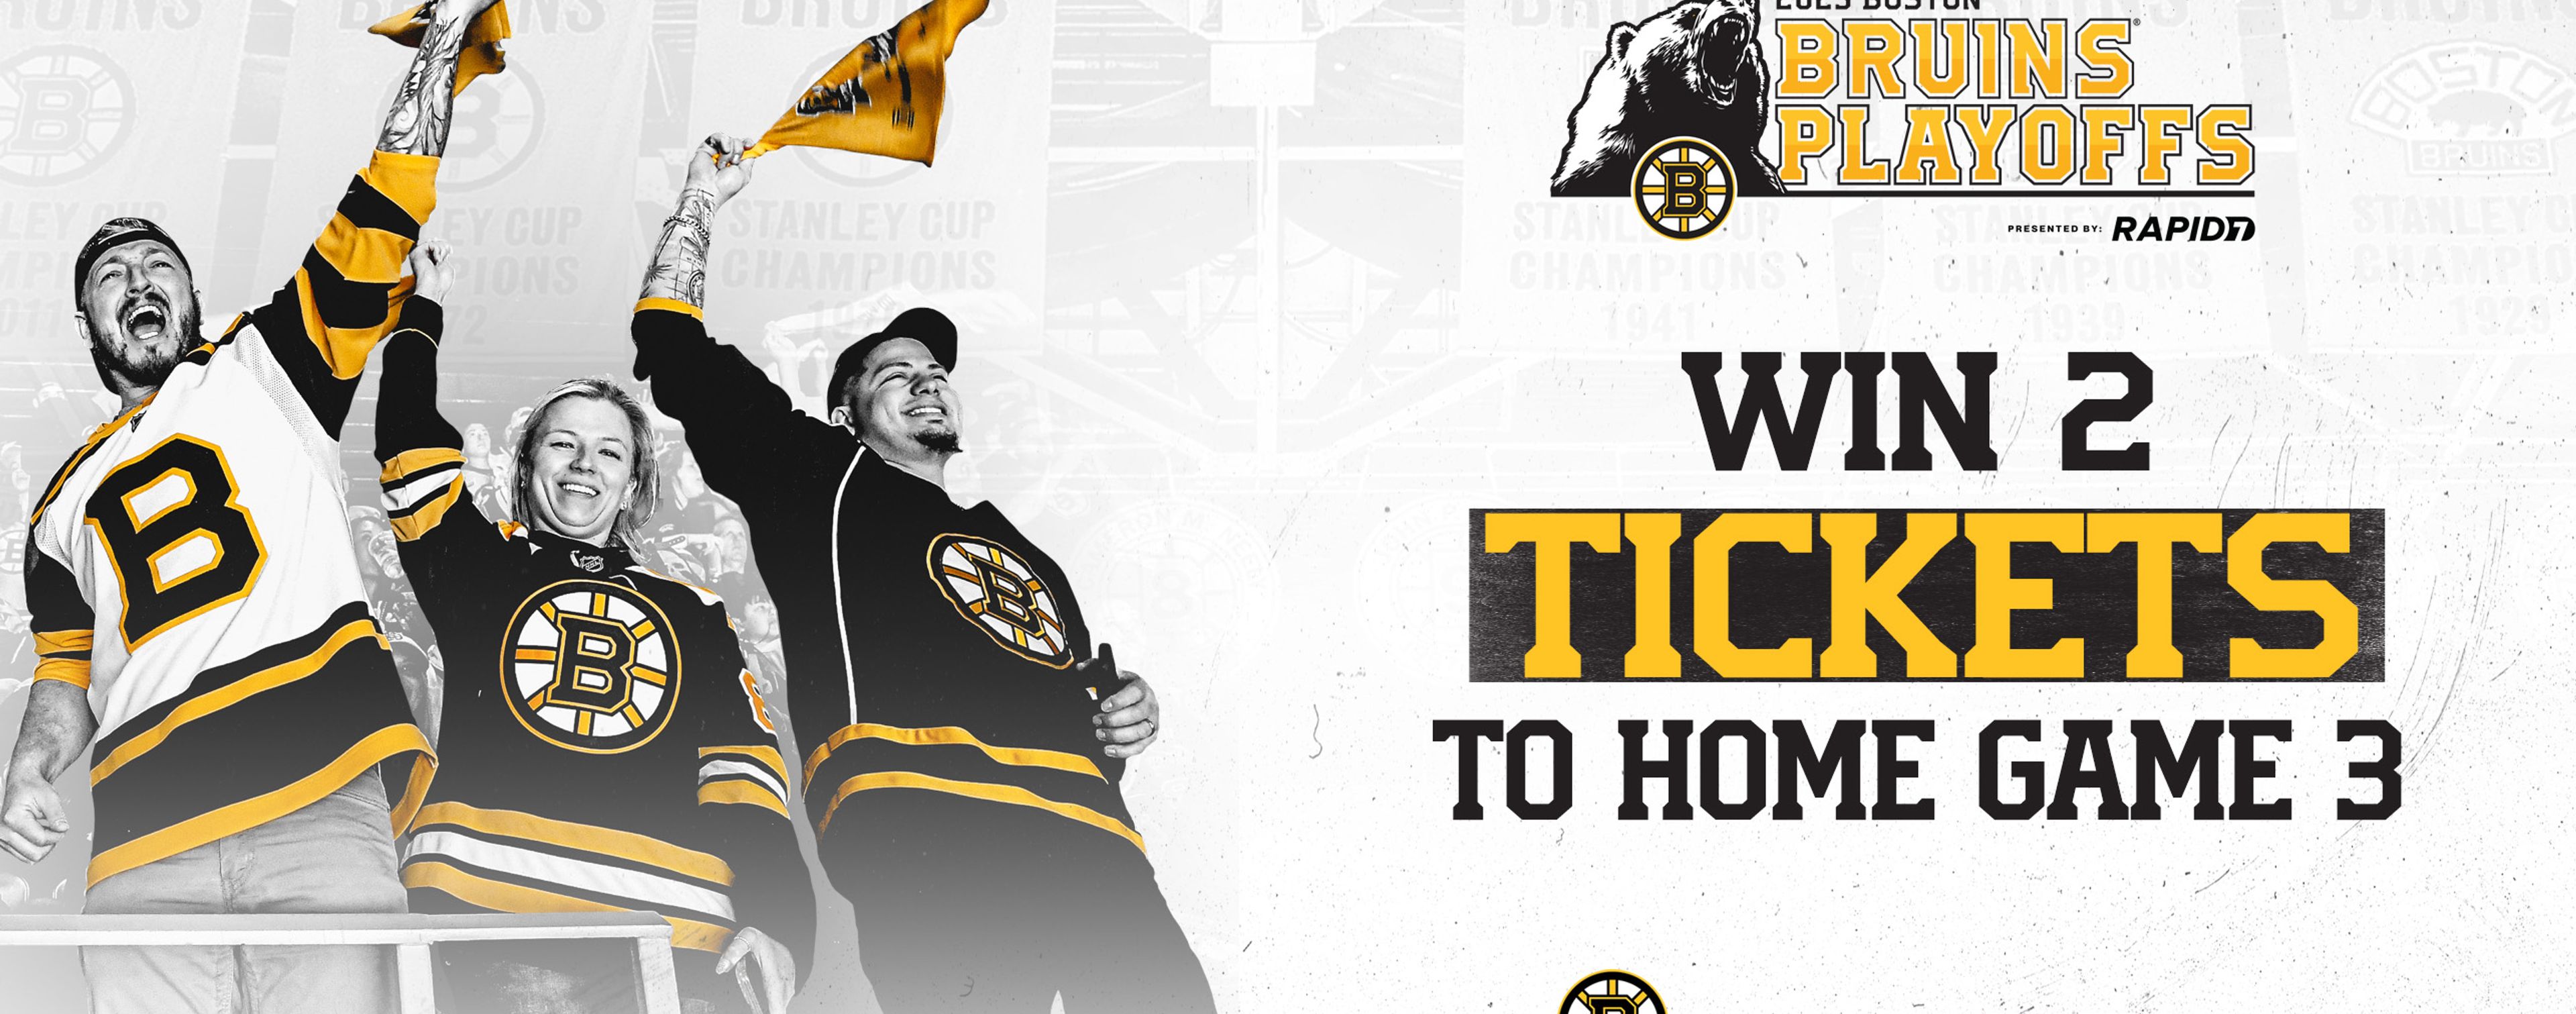 2 Tickets to Bruins Playoff Home Game 3 featured image